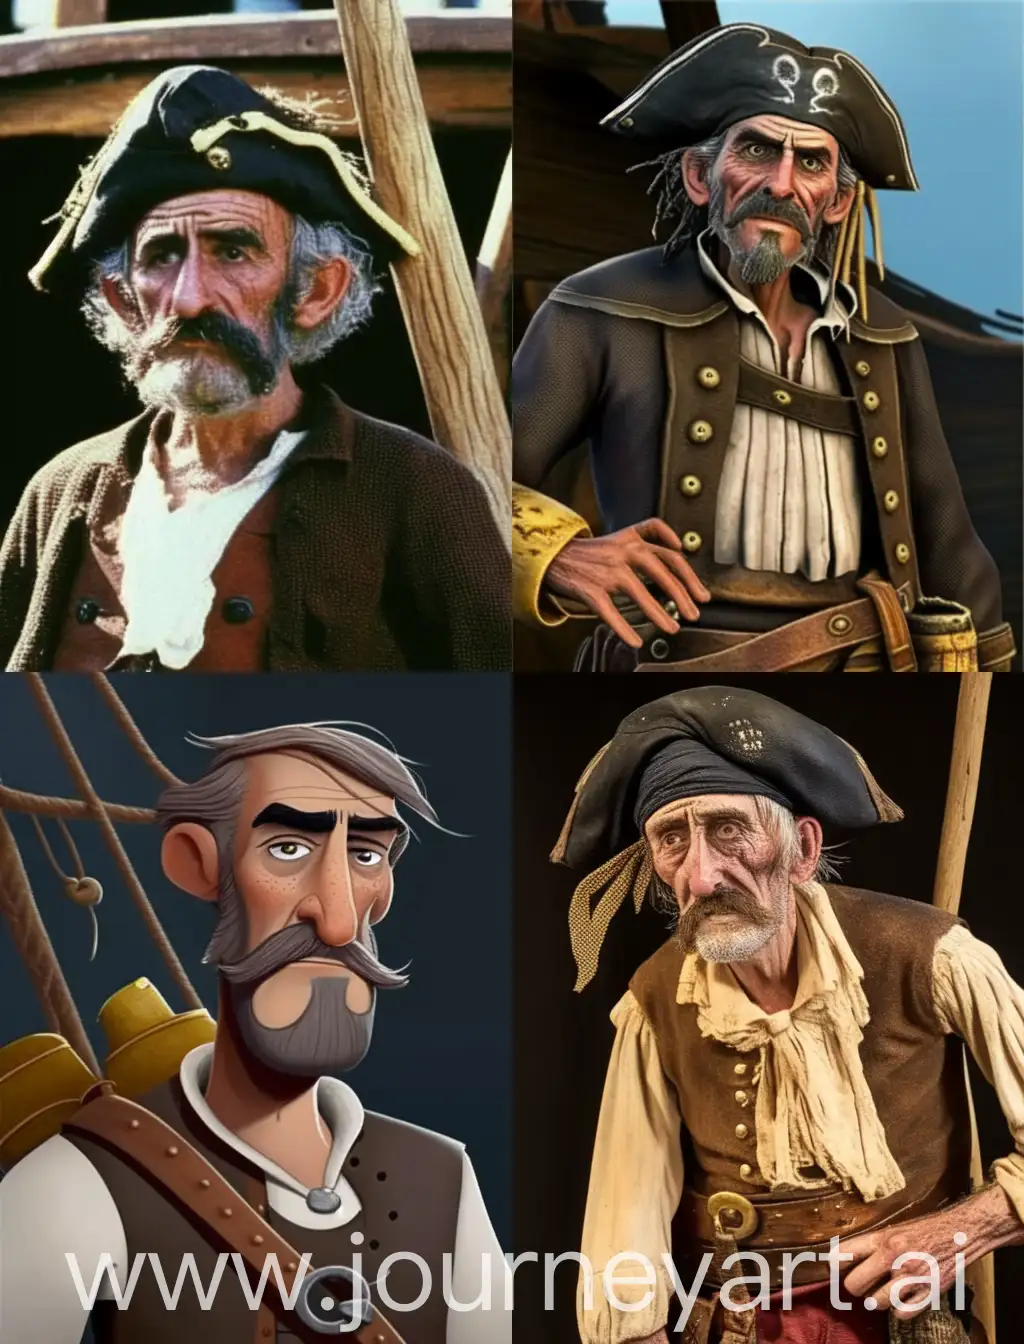 Charles or Charlie Butter is an old pirate. He is wiry, dry and tall. His hair is thin and his eyes are as black as tar. There is no facial hair, except for fine stubble. Instead of his left leg, he has a wooden prosthesis. It looks painful. He is a tired but hot-tempered man. He likes to grumble and generally talks a lot. He likes to share wisdom and just his opinion. He does not like it when someone argues with his opinion, cheeky and young people. A greedy drunkard, like many pirates. The right hand of the ship's captain.